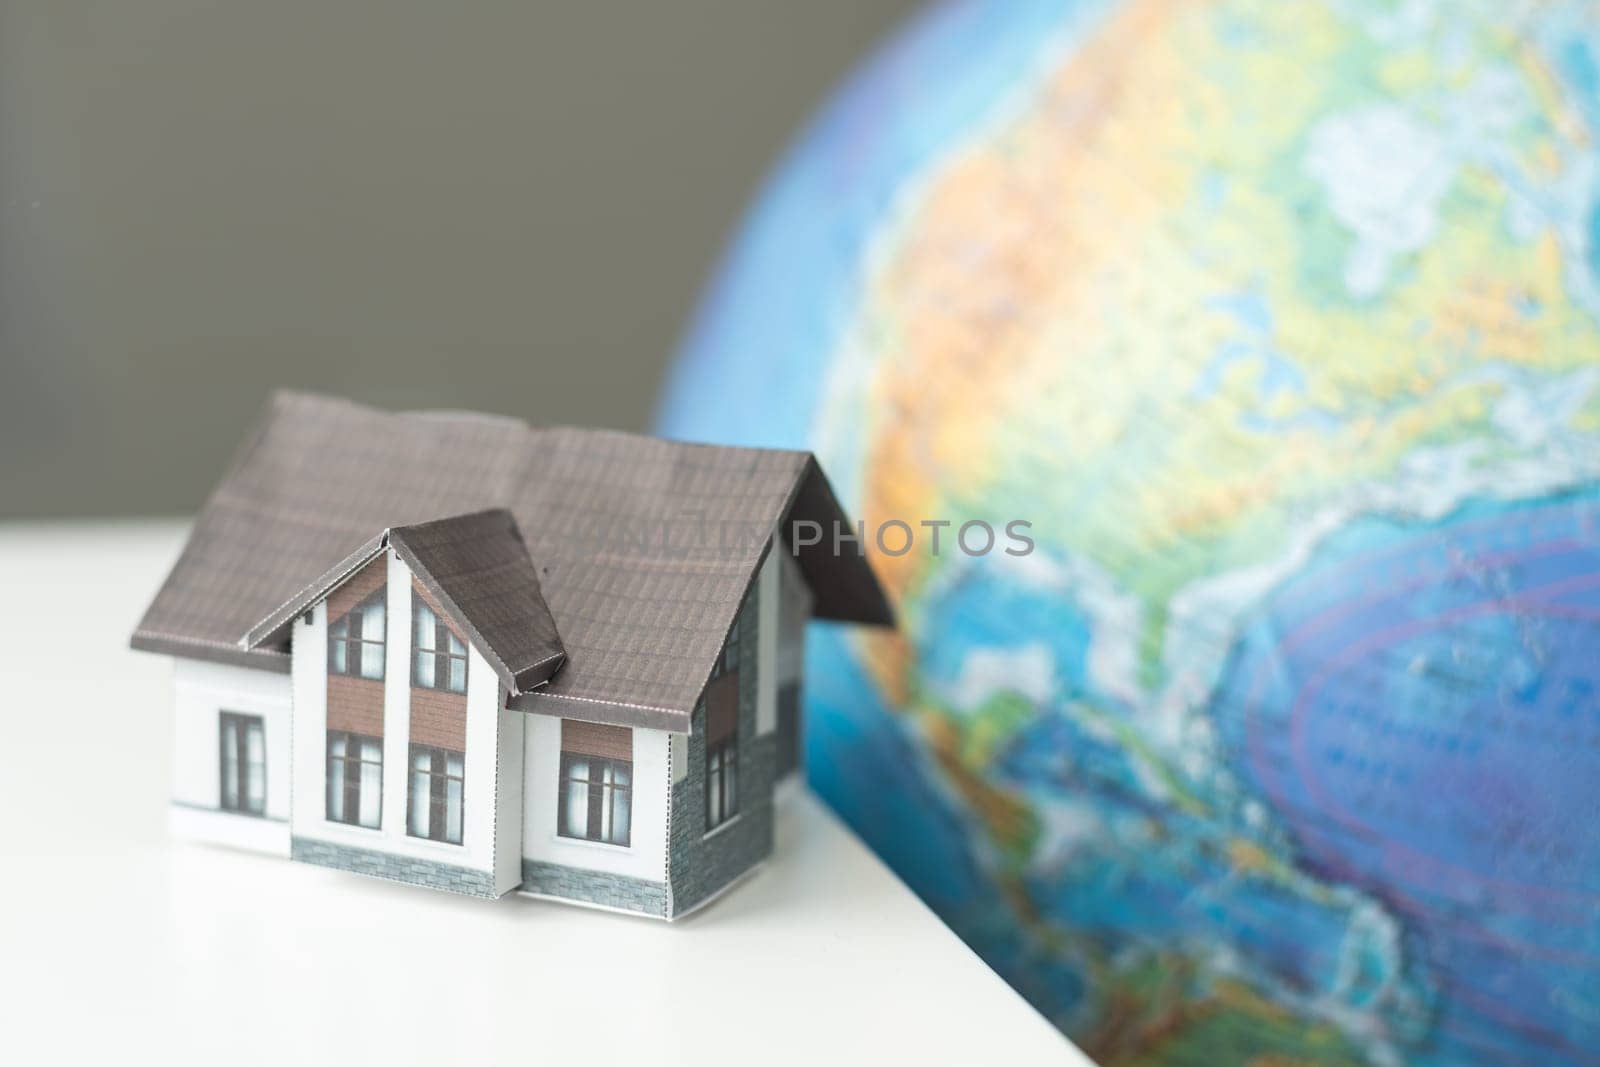 House miniature with globe in background against plain wall by Andelov13